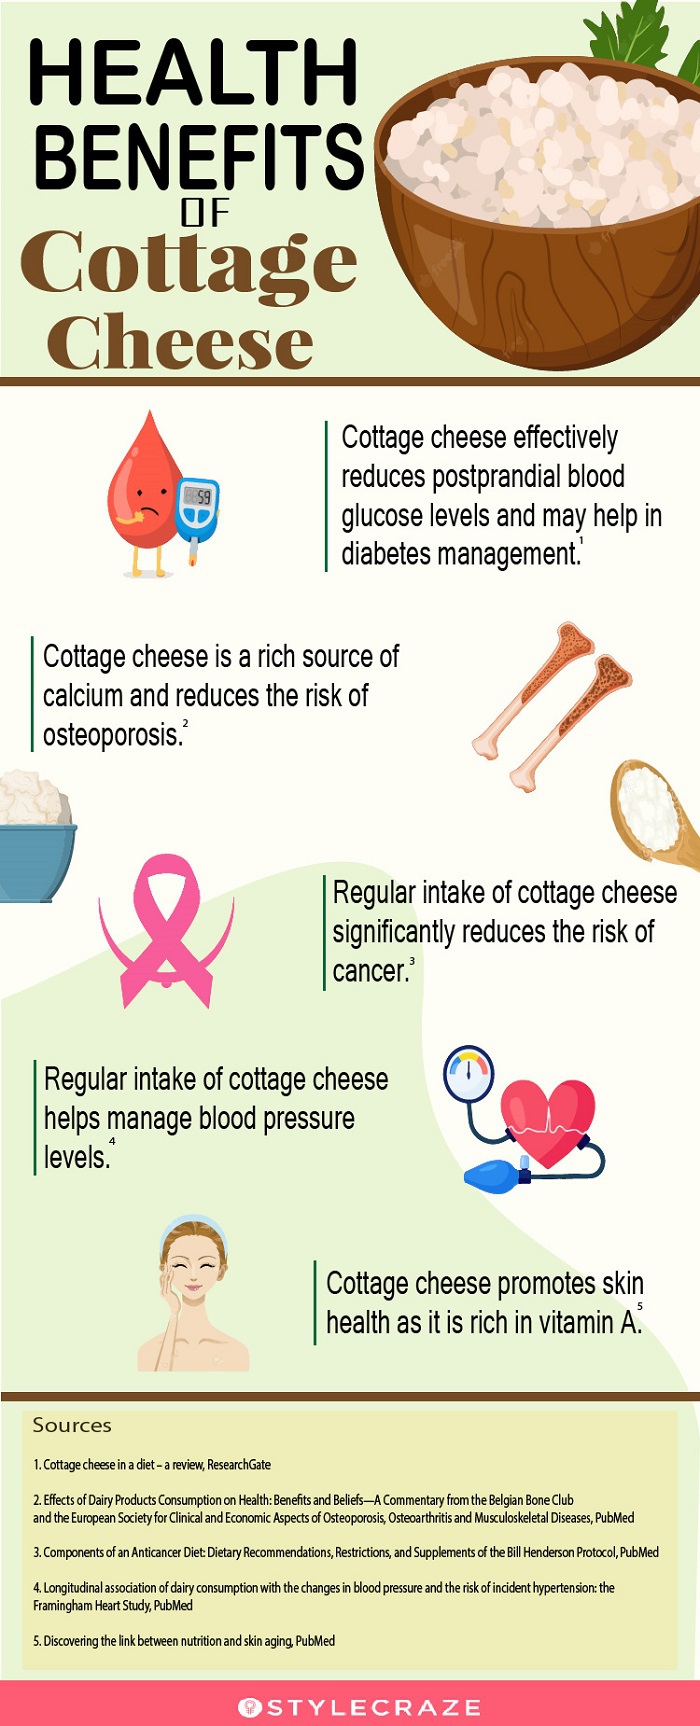 benefits of cottage cheese [infographic]